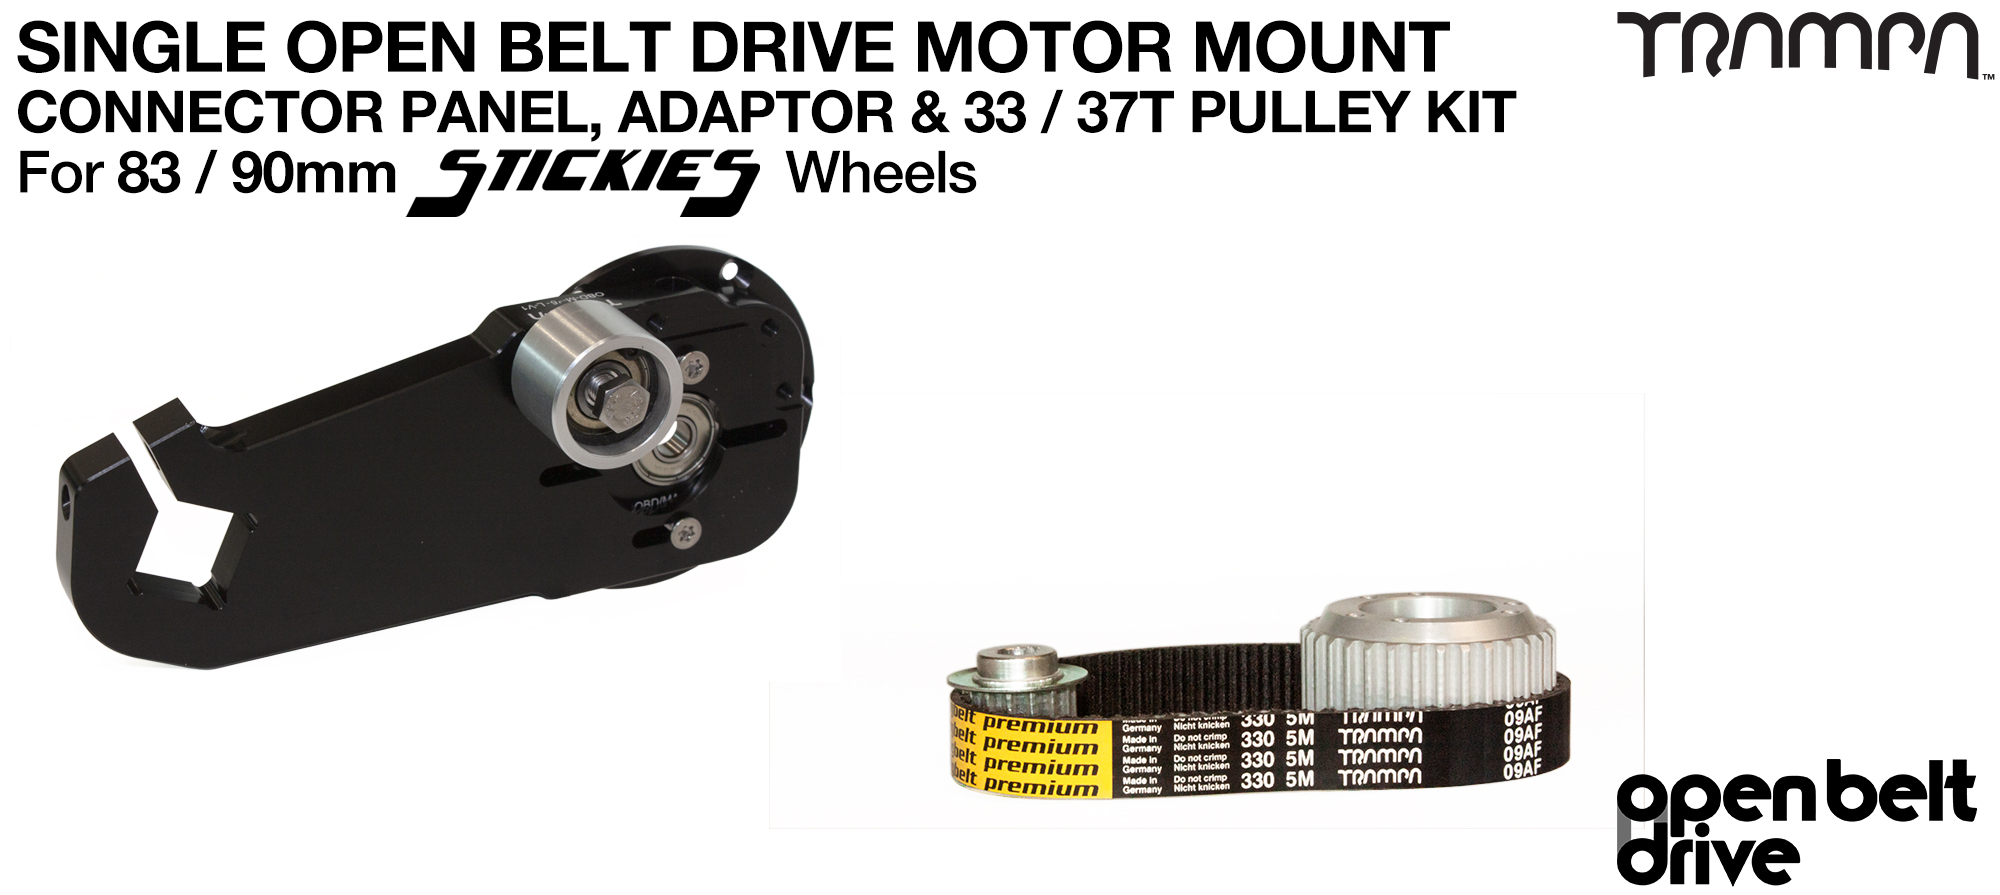 66T OBD Motor Mount & 33 / 37 tooth Pulley for STICKIES Wheels - SINGLE